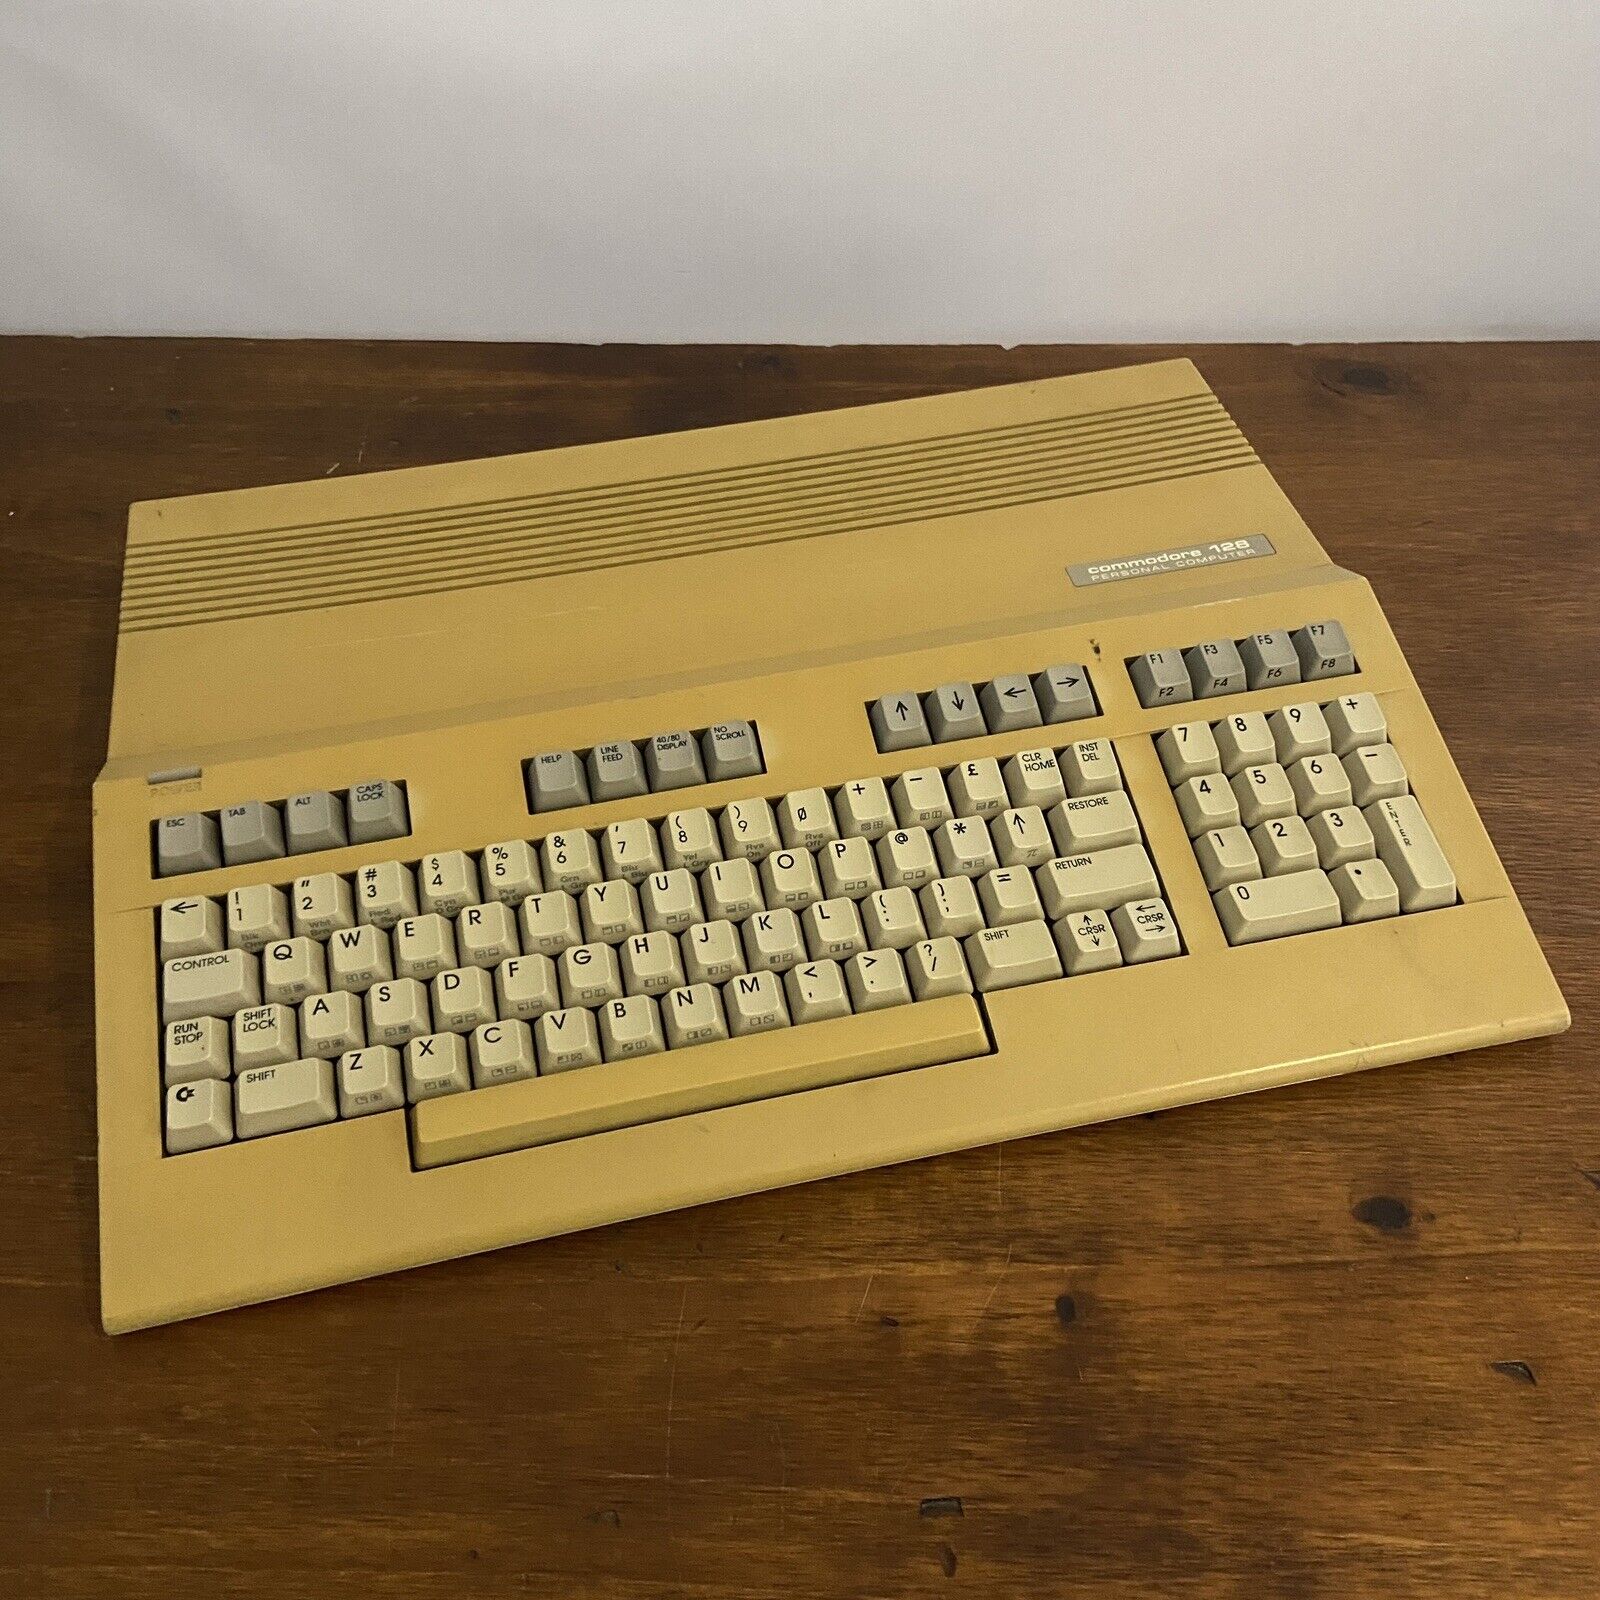 Commodore 128 Personal Computer AS-IS